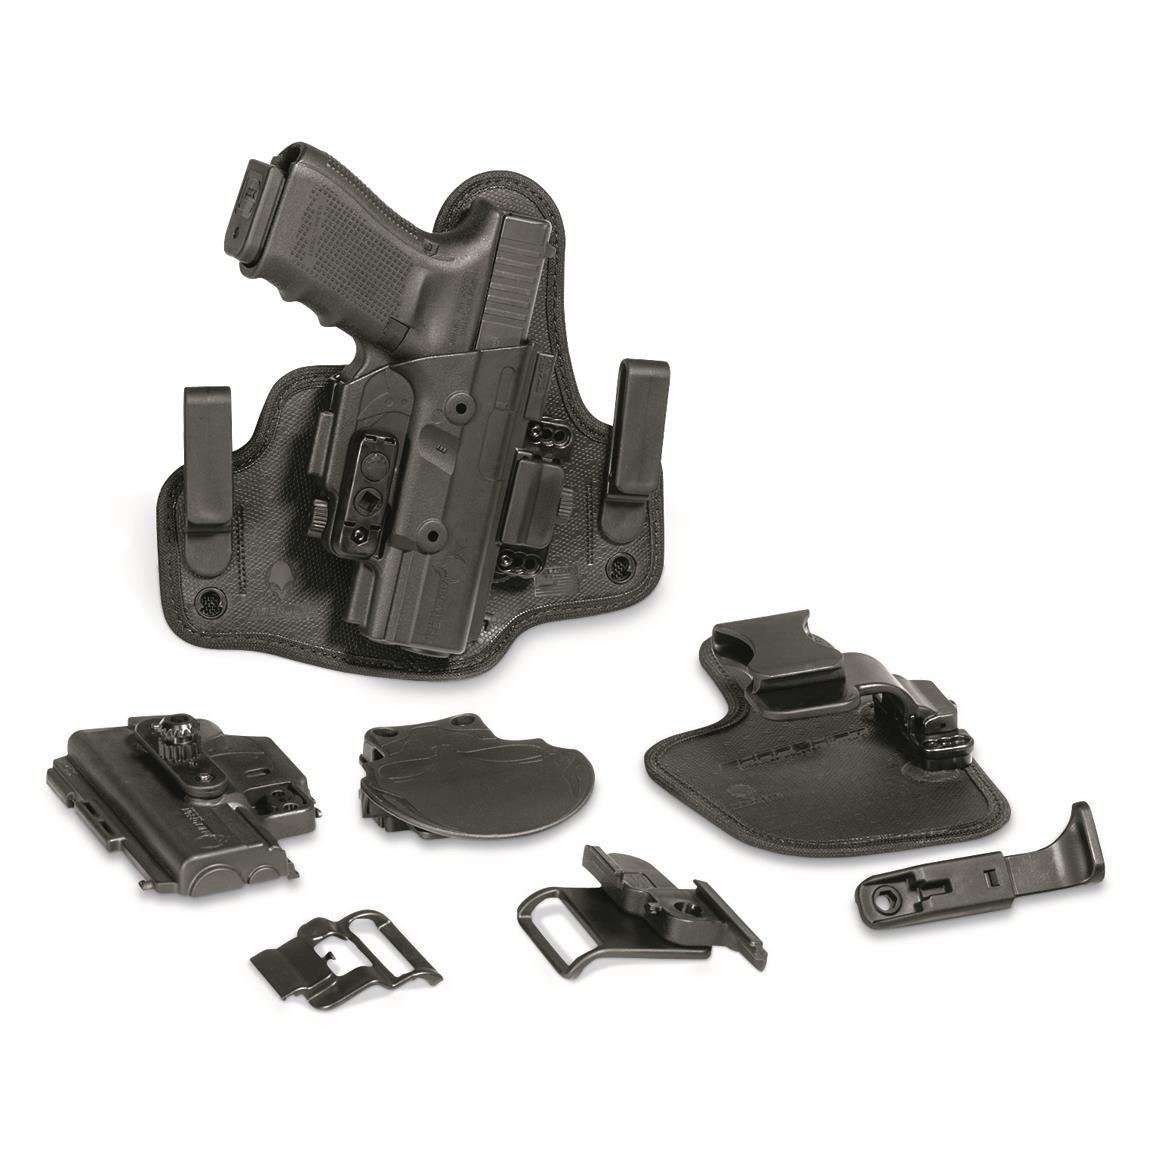 Alien Gear ShapeShift Holster Core Carry Pack, Smith & Wesson M&P 9mm Compact